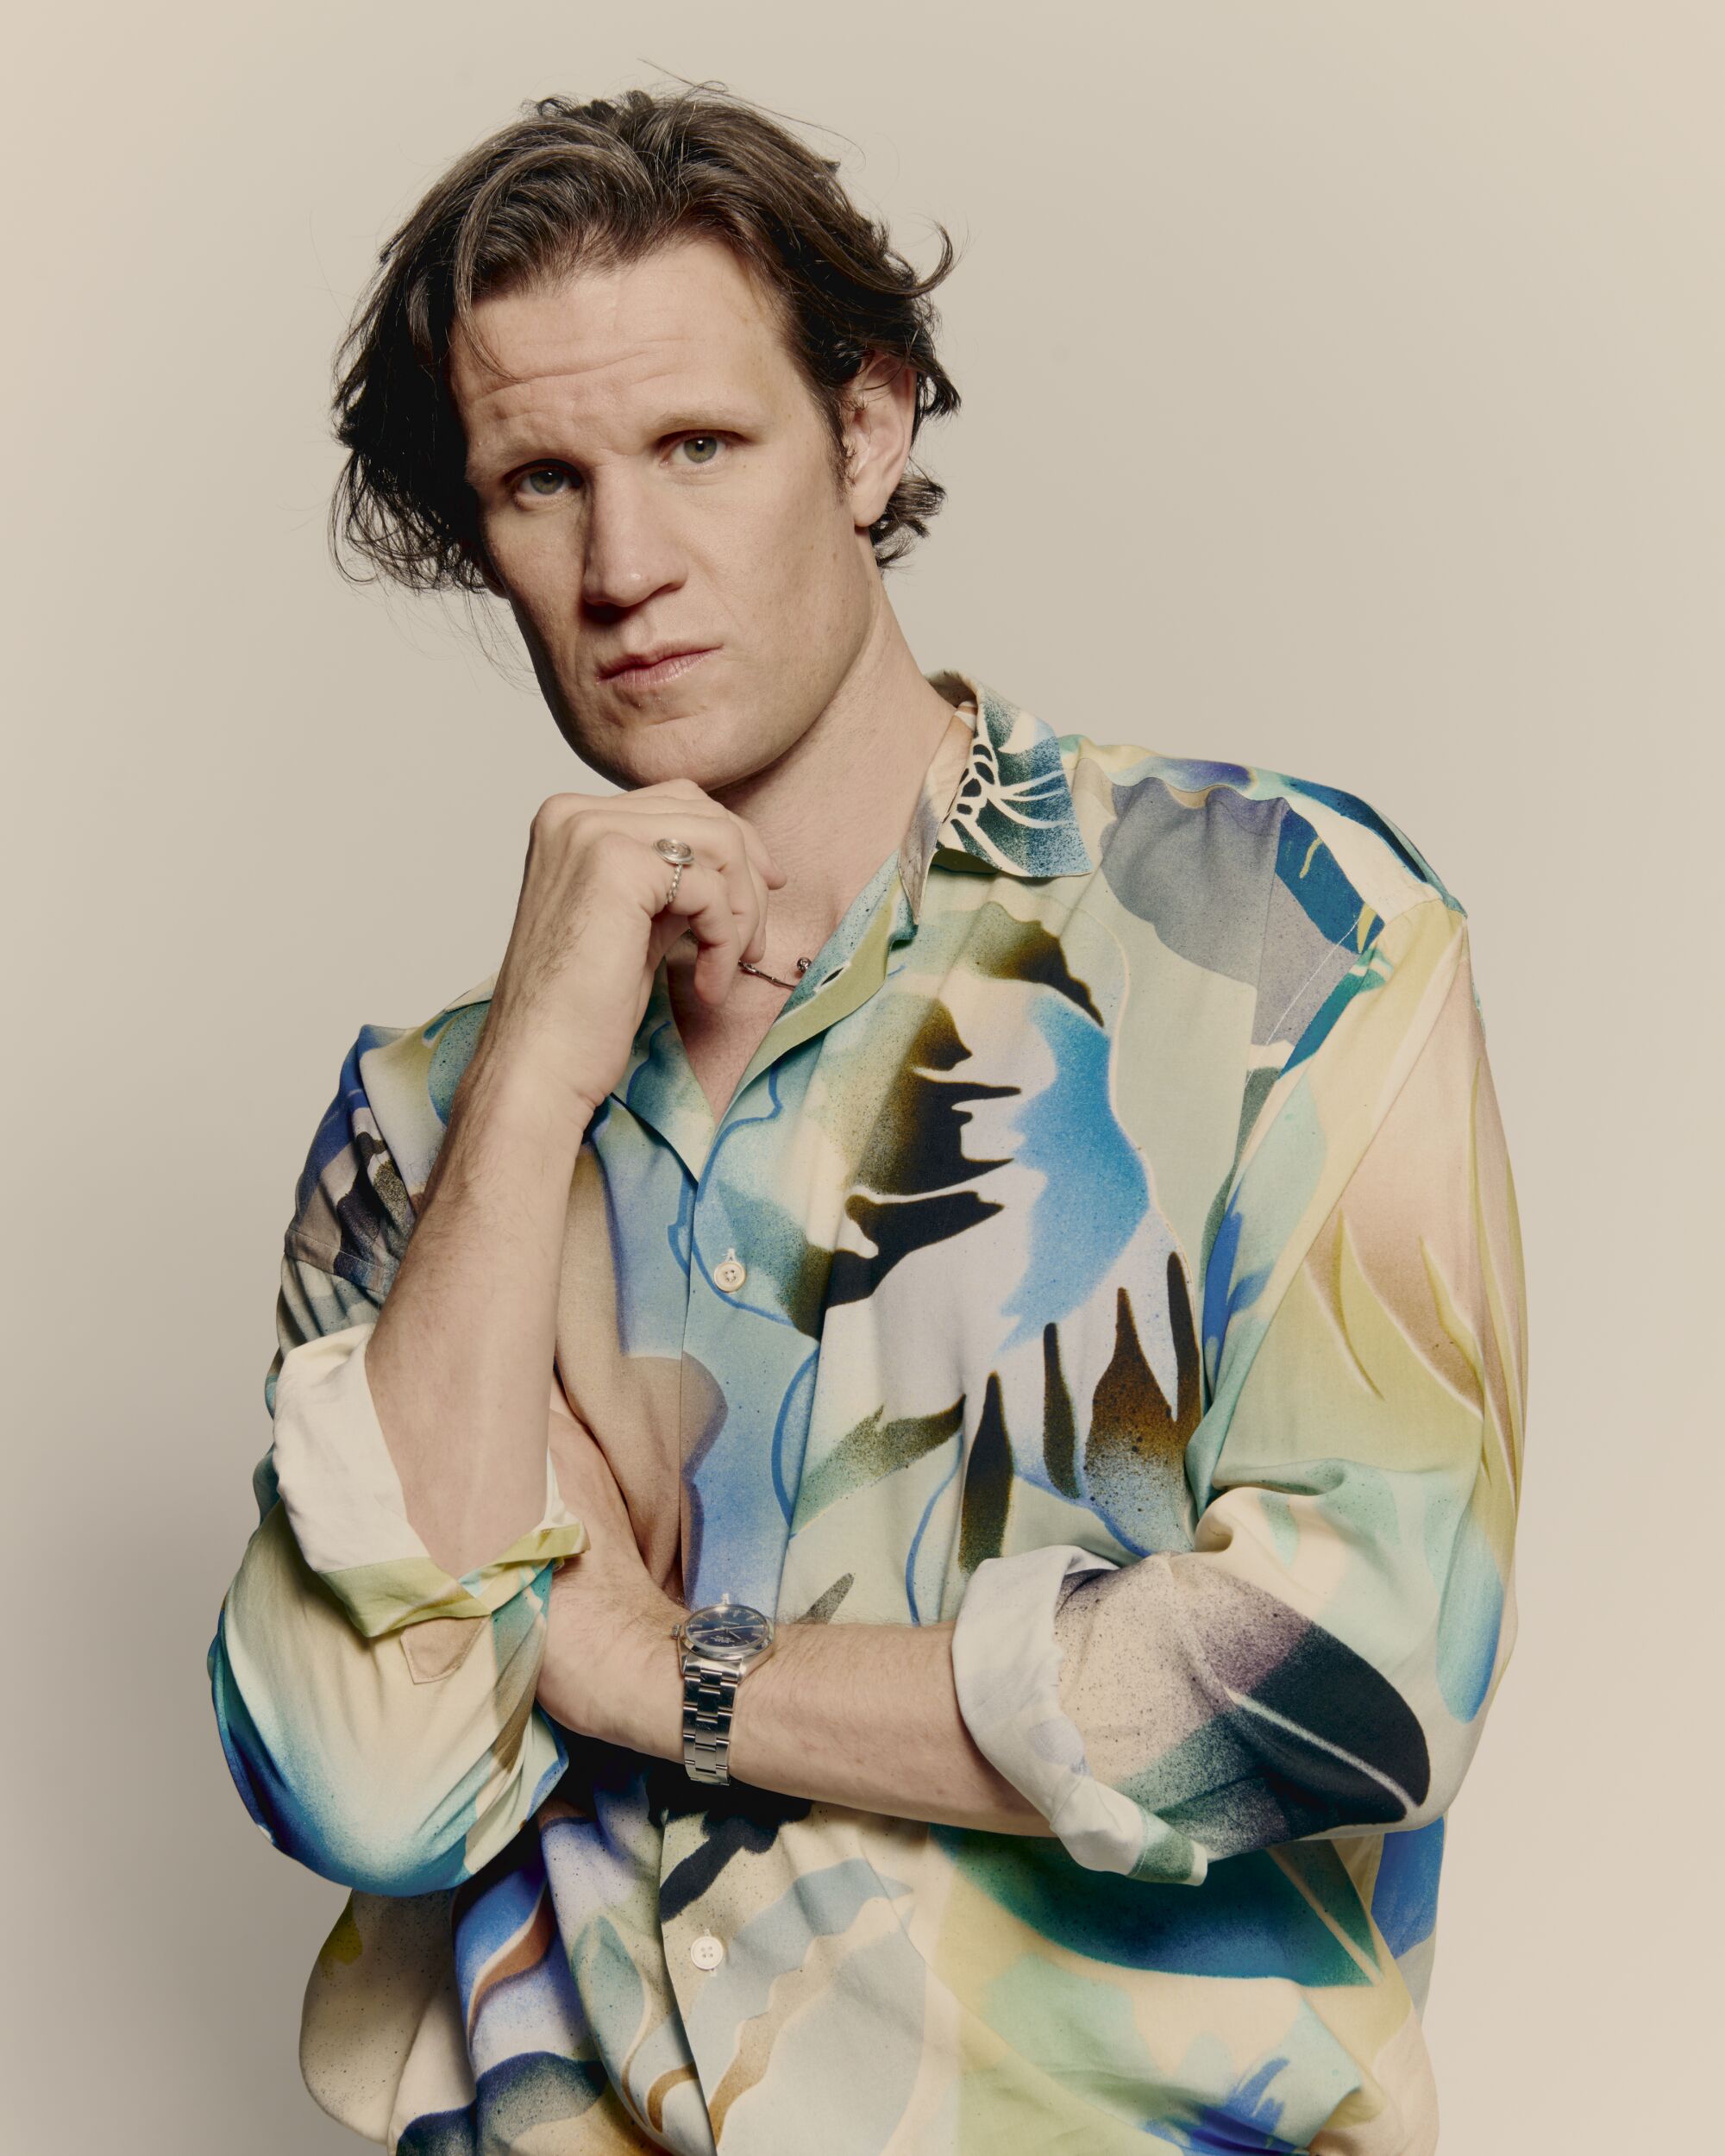 The actor Matt Smith in a colorful patterned shirt